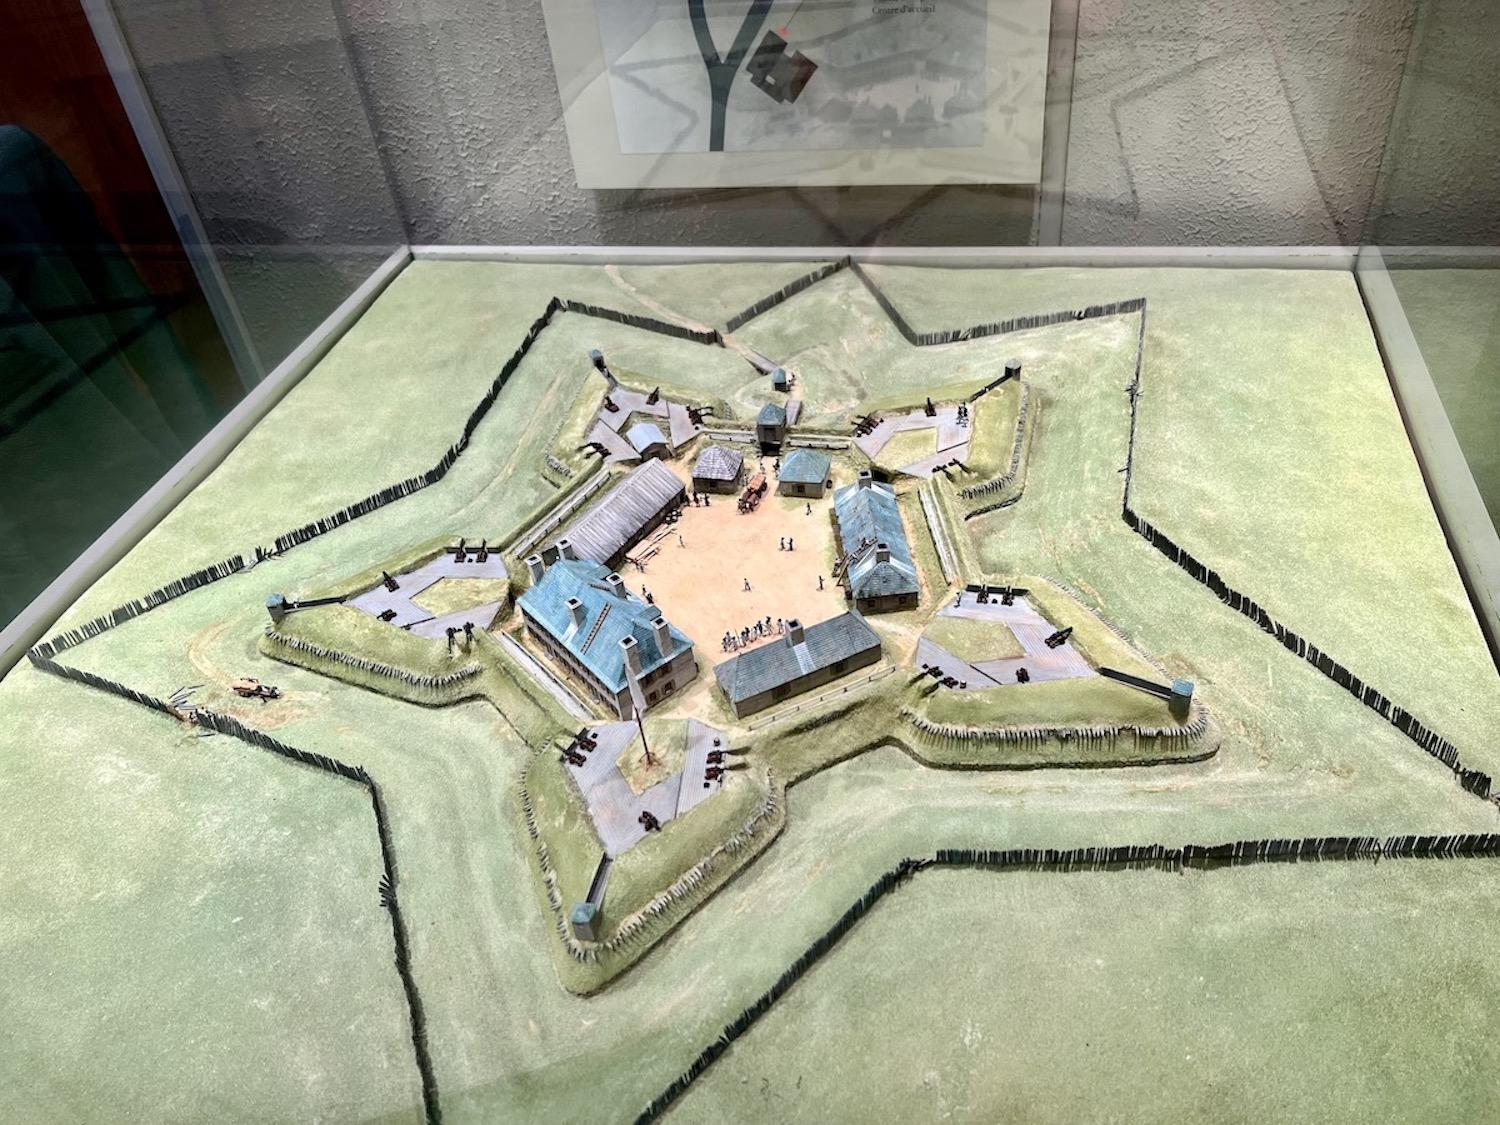 In the visitor center museum, a model shows how the star-shaped fort looks from above.